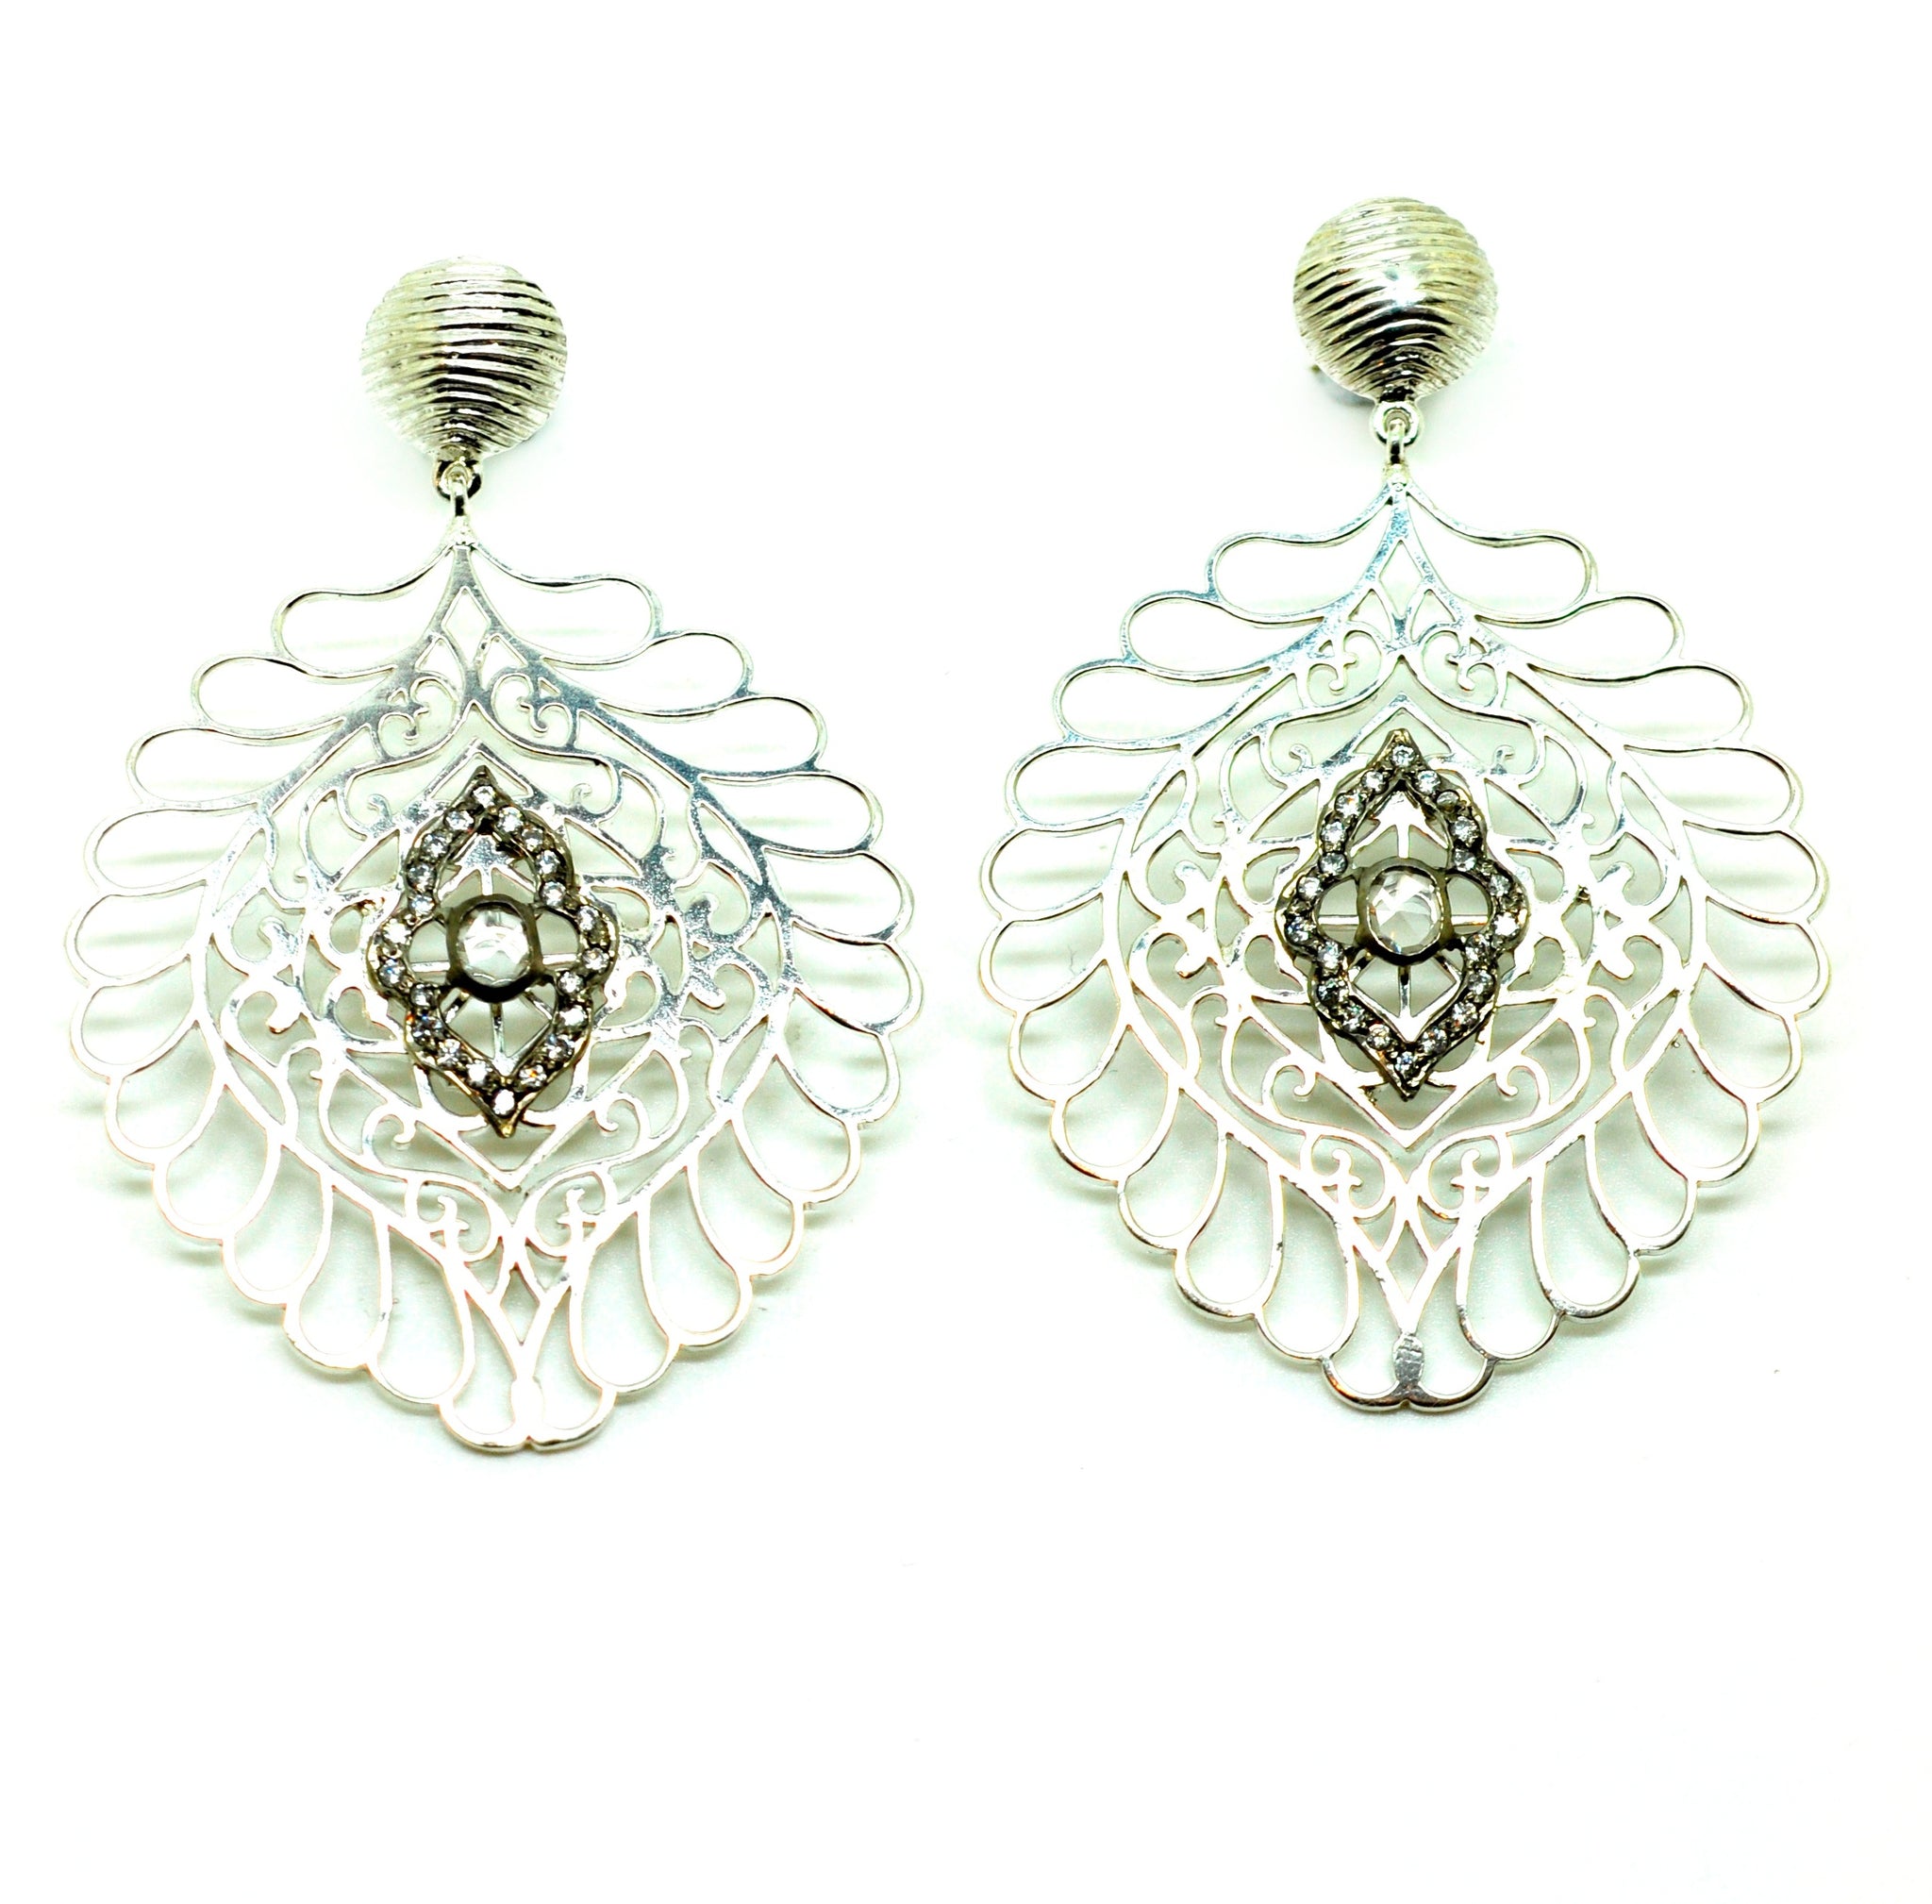 SOLD- NEW Antique large filigree earring